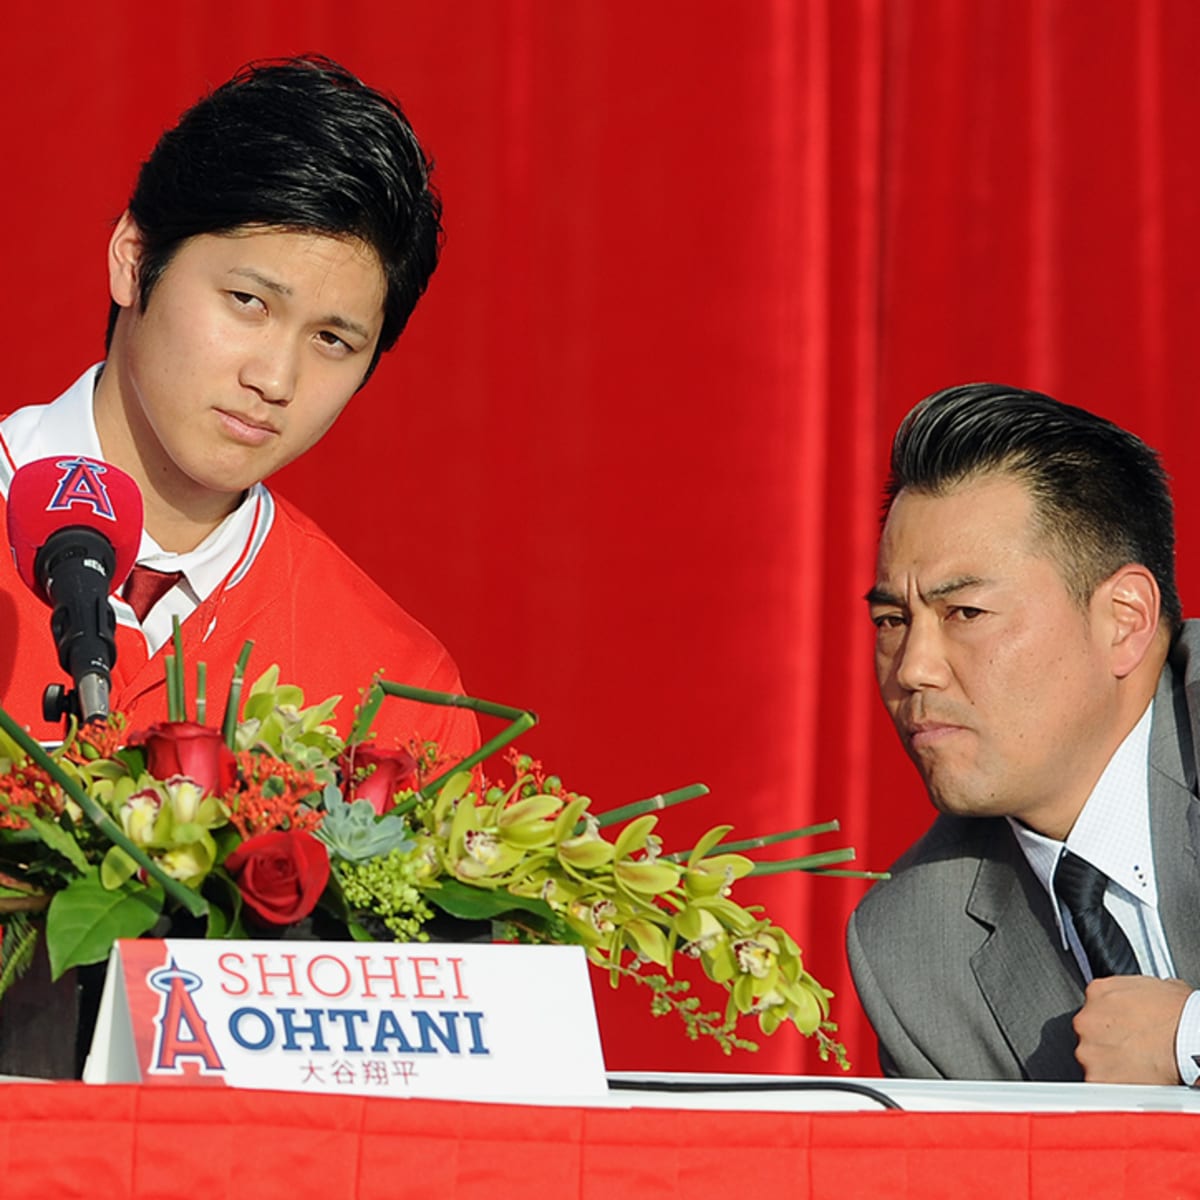 Shohei Ohtani bids farewell to fans in Japan - Sports Illustrated